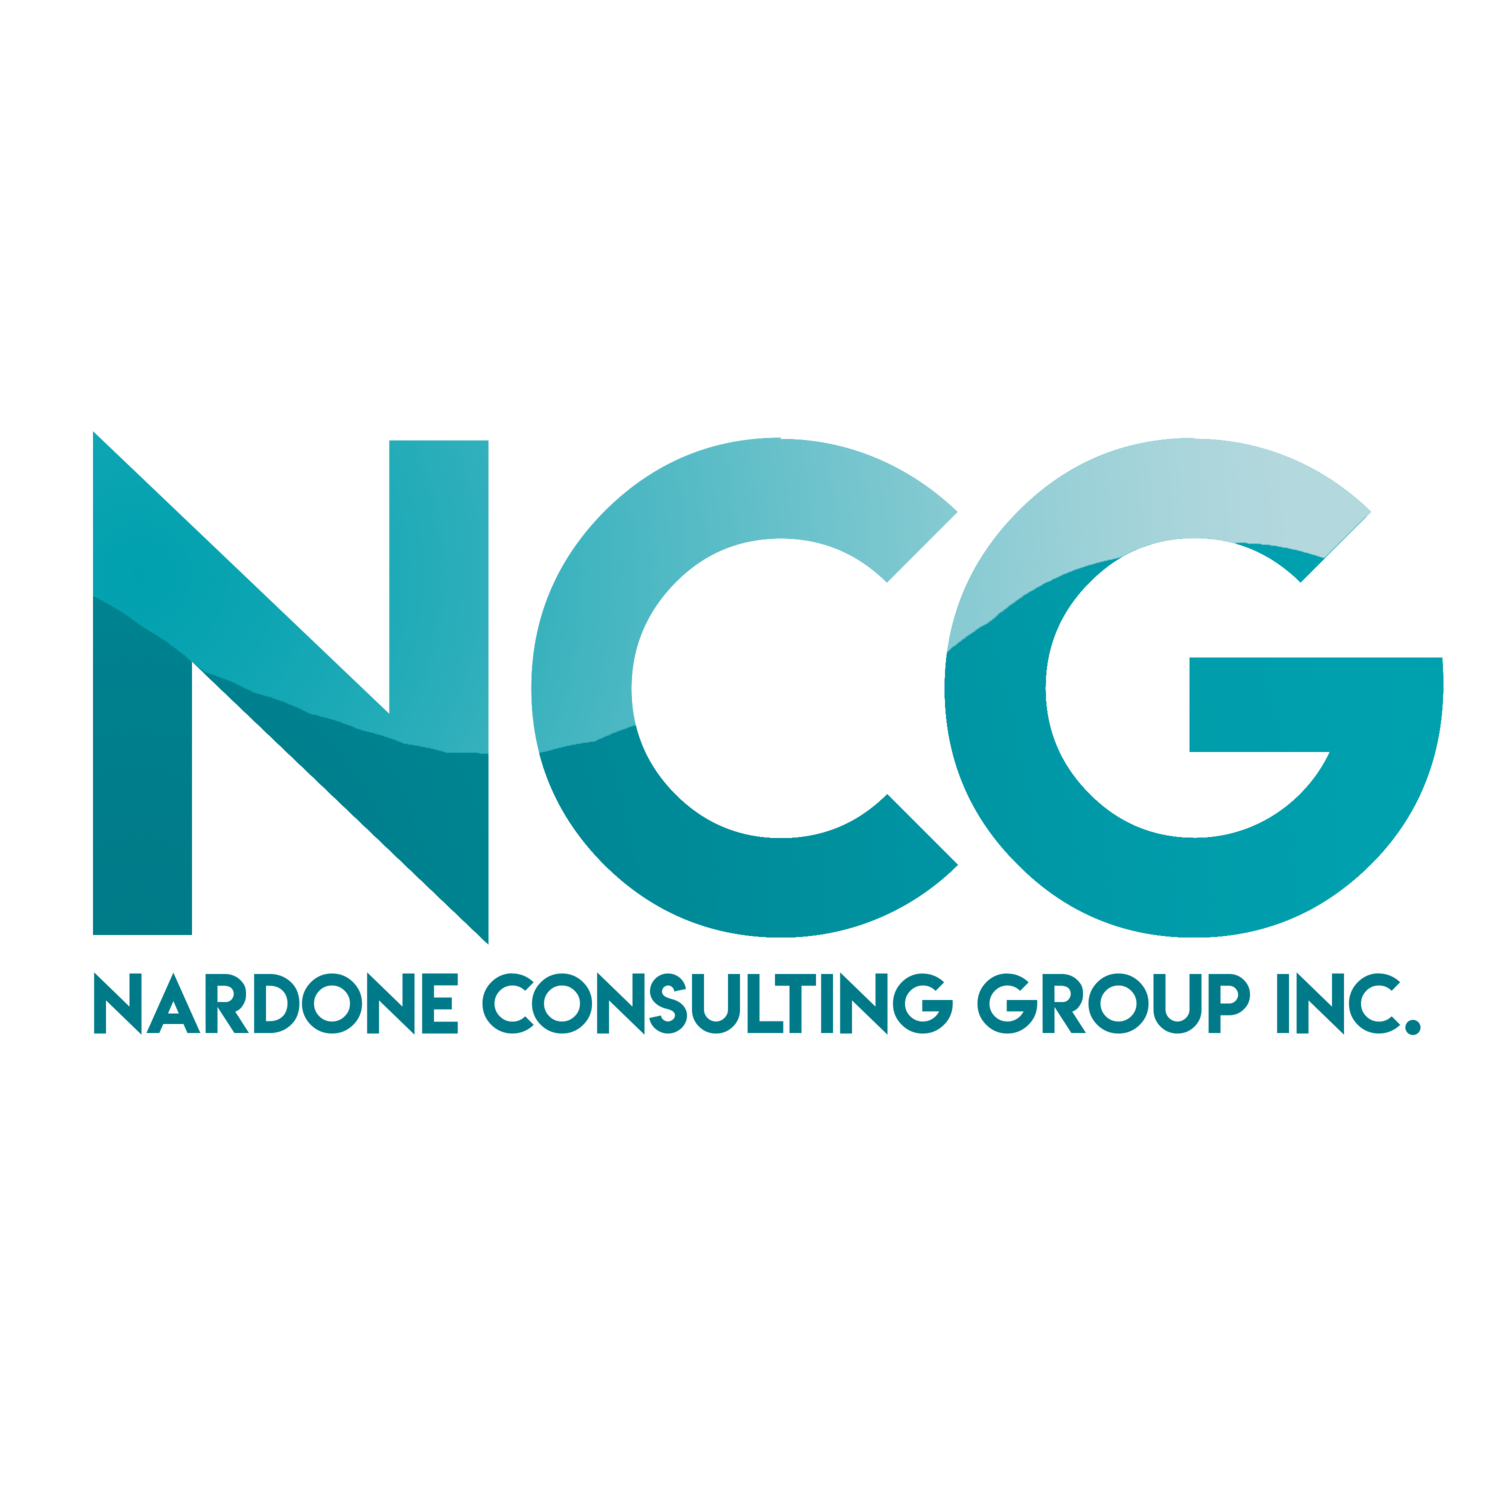 Nardone Consulting Group, INC.